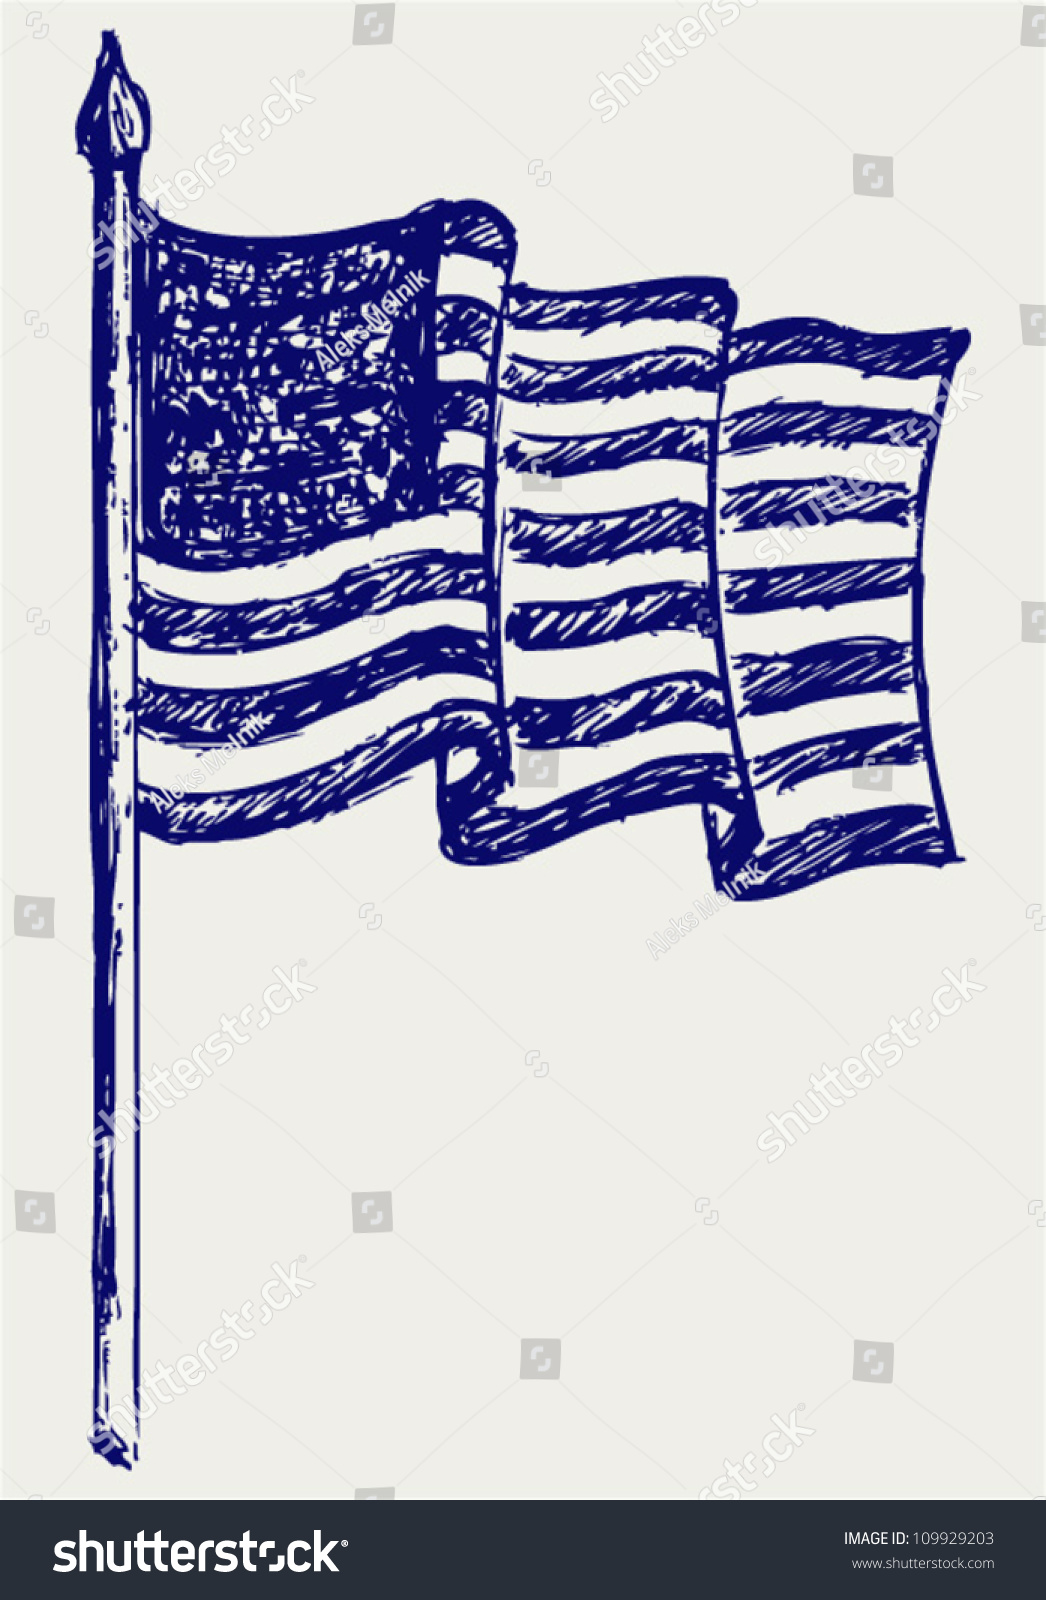 American Flag Sketch Stock Vector (Royalty Free) 109929203 - Shutterstock